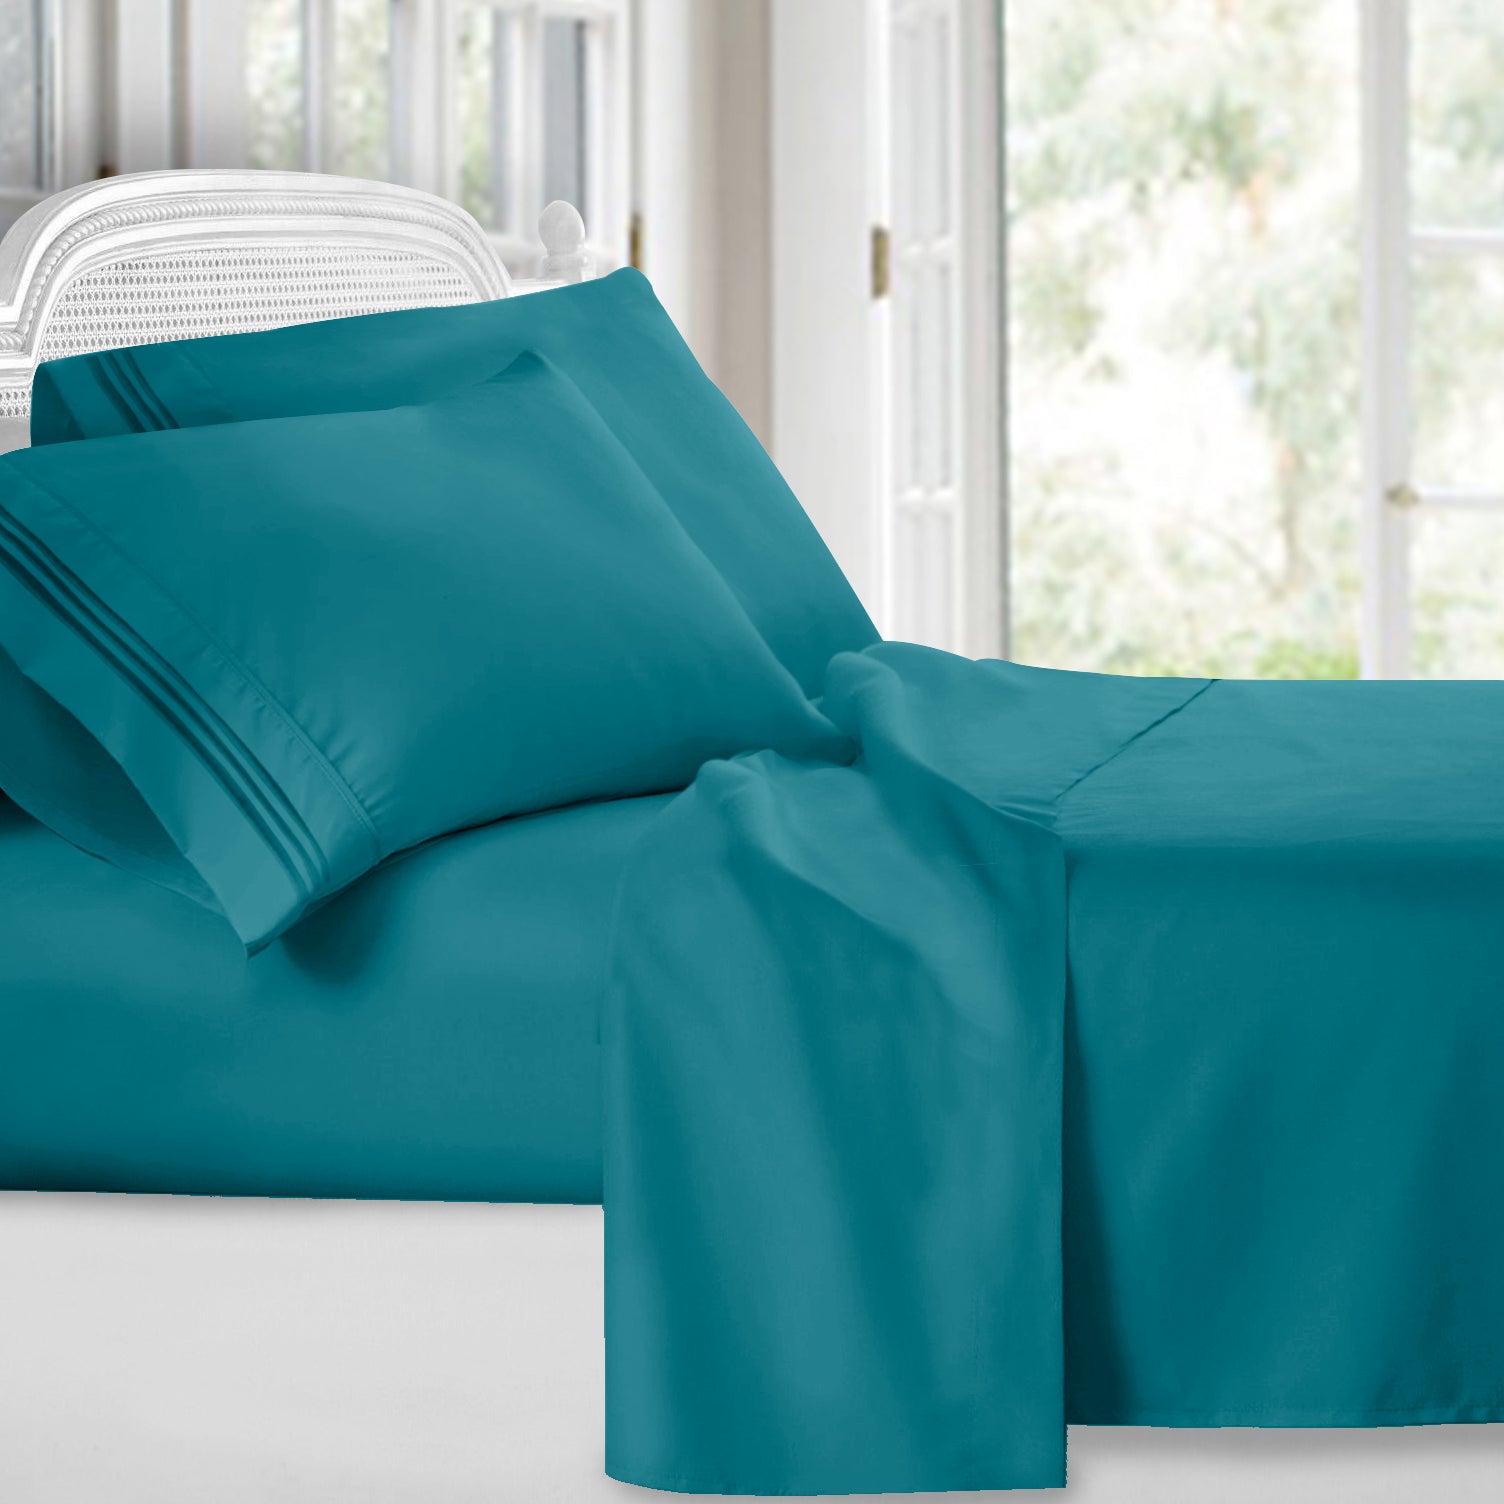 Extra Deep Pocket Fitted Sheet Elastic Corner Straps Fitted Sheets 18 -  21 California King Size Calm Blue Color 